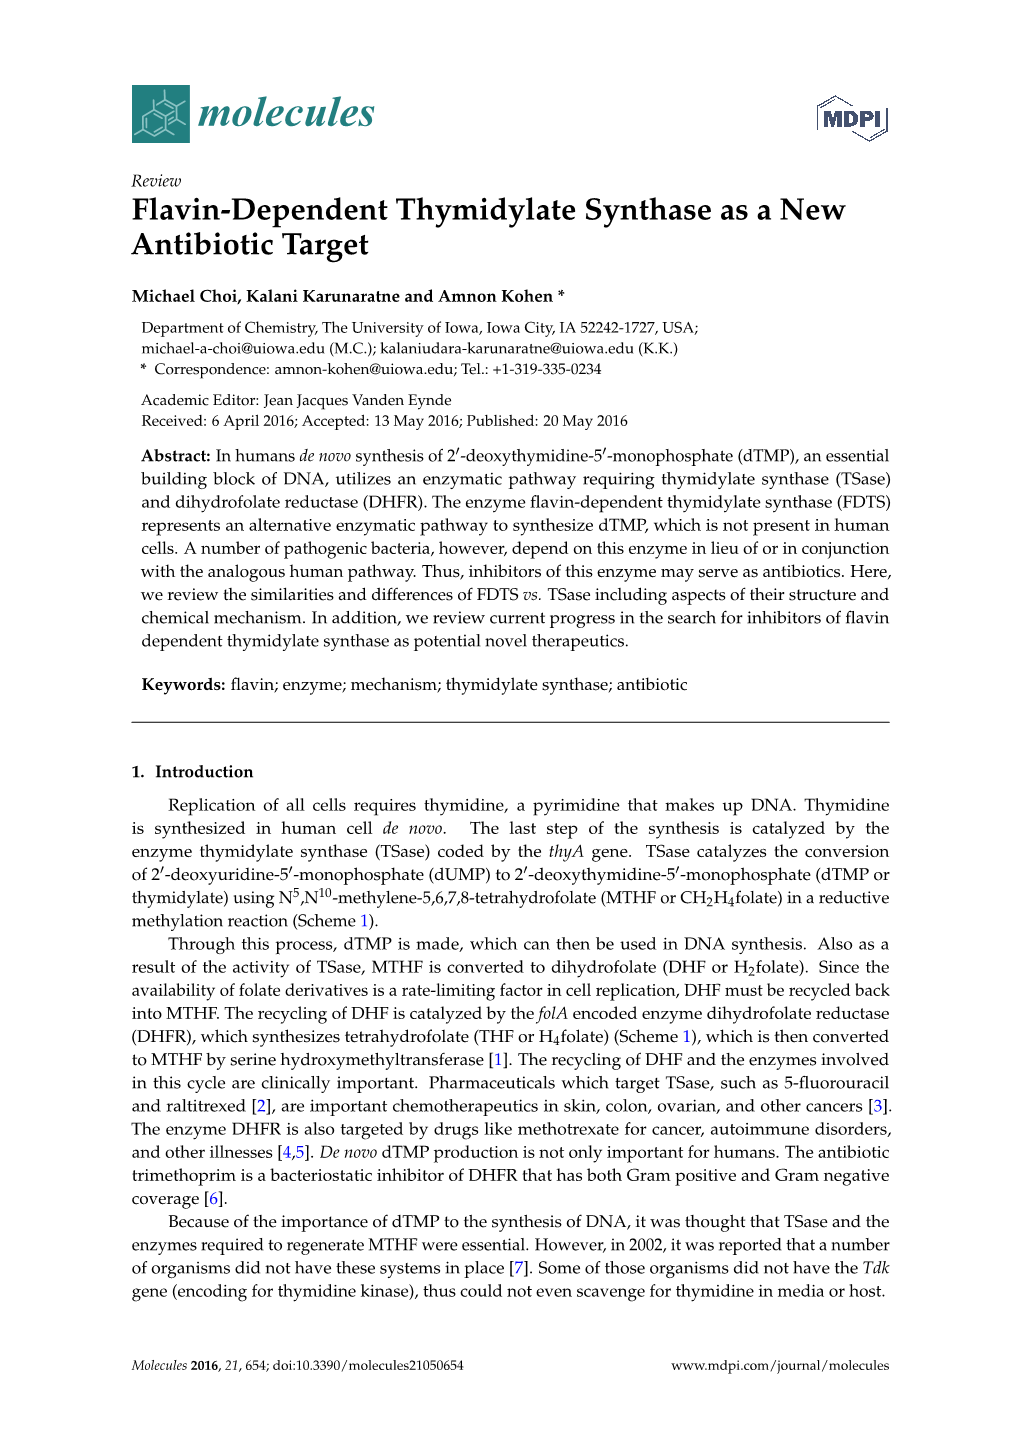 Flavin-Dependent Thymidylate Synthase As a New Antibiotic Target